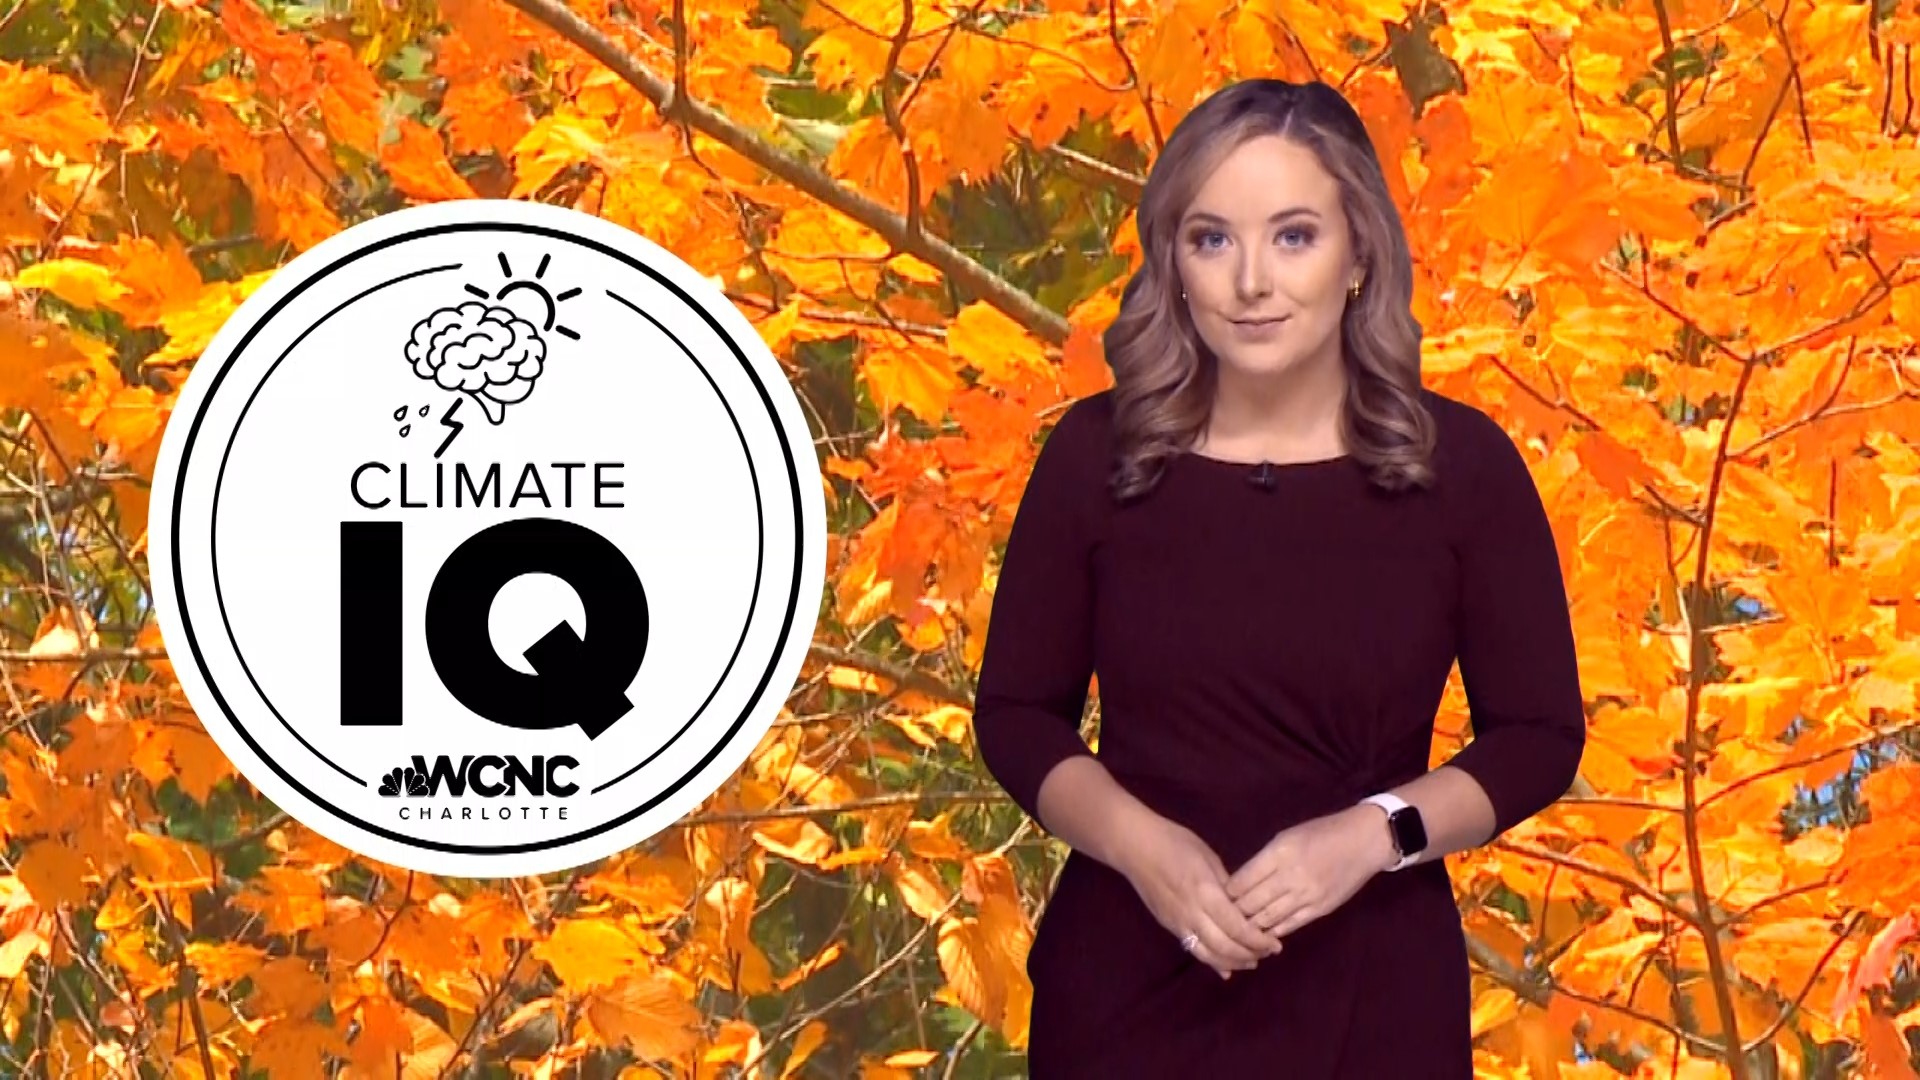 Warming brought on by climate change can dull reds, oranges, and yellows and delay the peak foliage period.